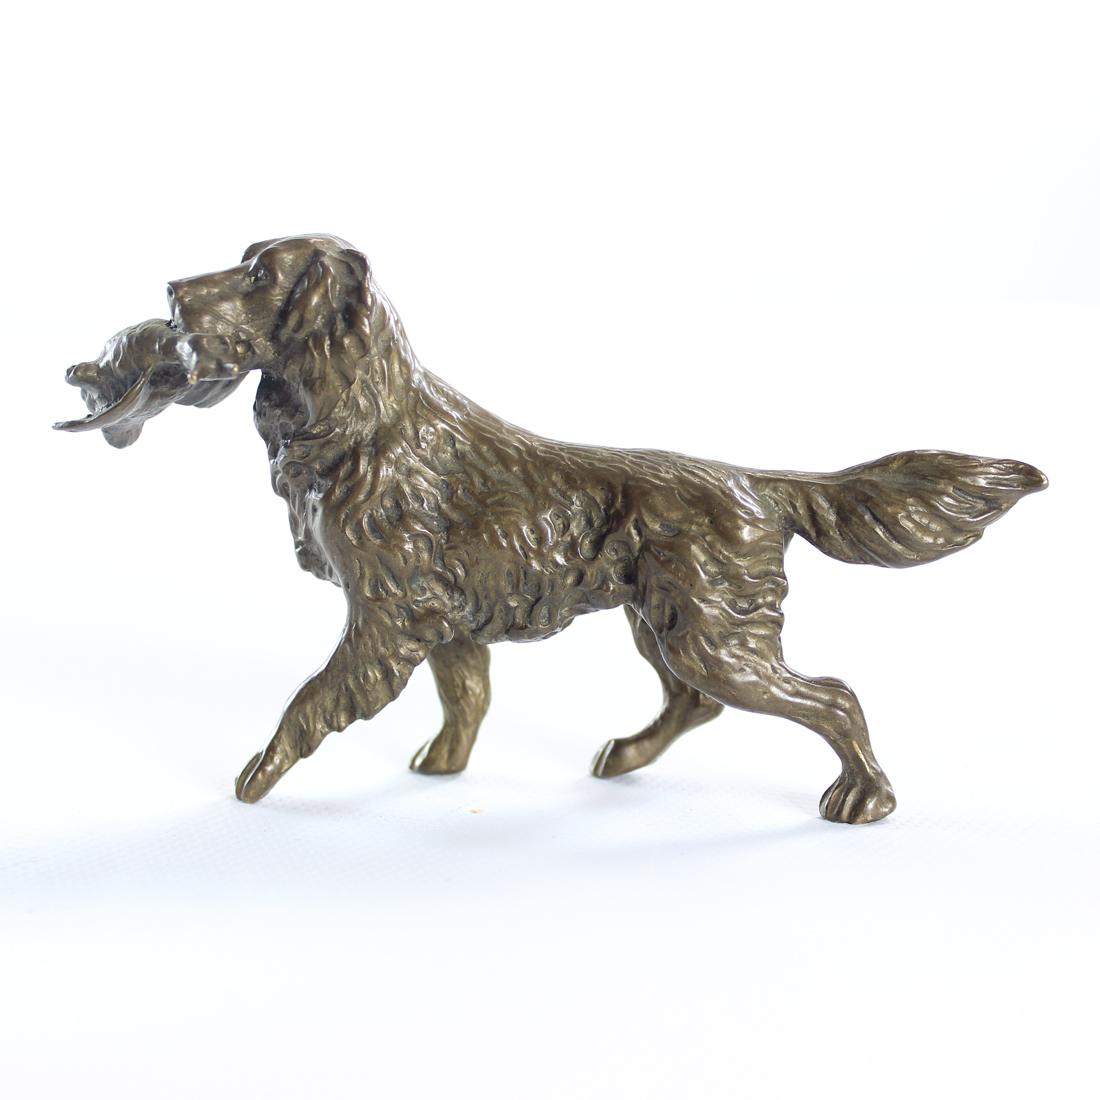 Beautiful bronze sculpture of a hunting dog, a retriever with duck. The sculpture was produced in Czechoslovakia in art deco era. Beautiful detailed art work shows the dog perfectly with every hair and expression in place. Beautiful dog structure in